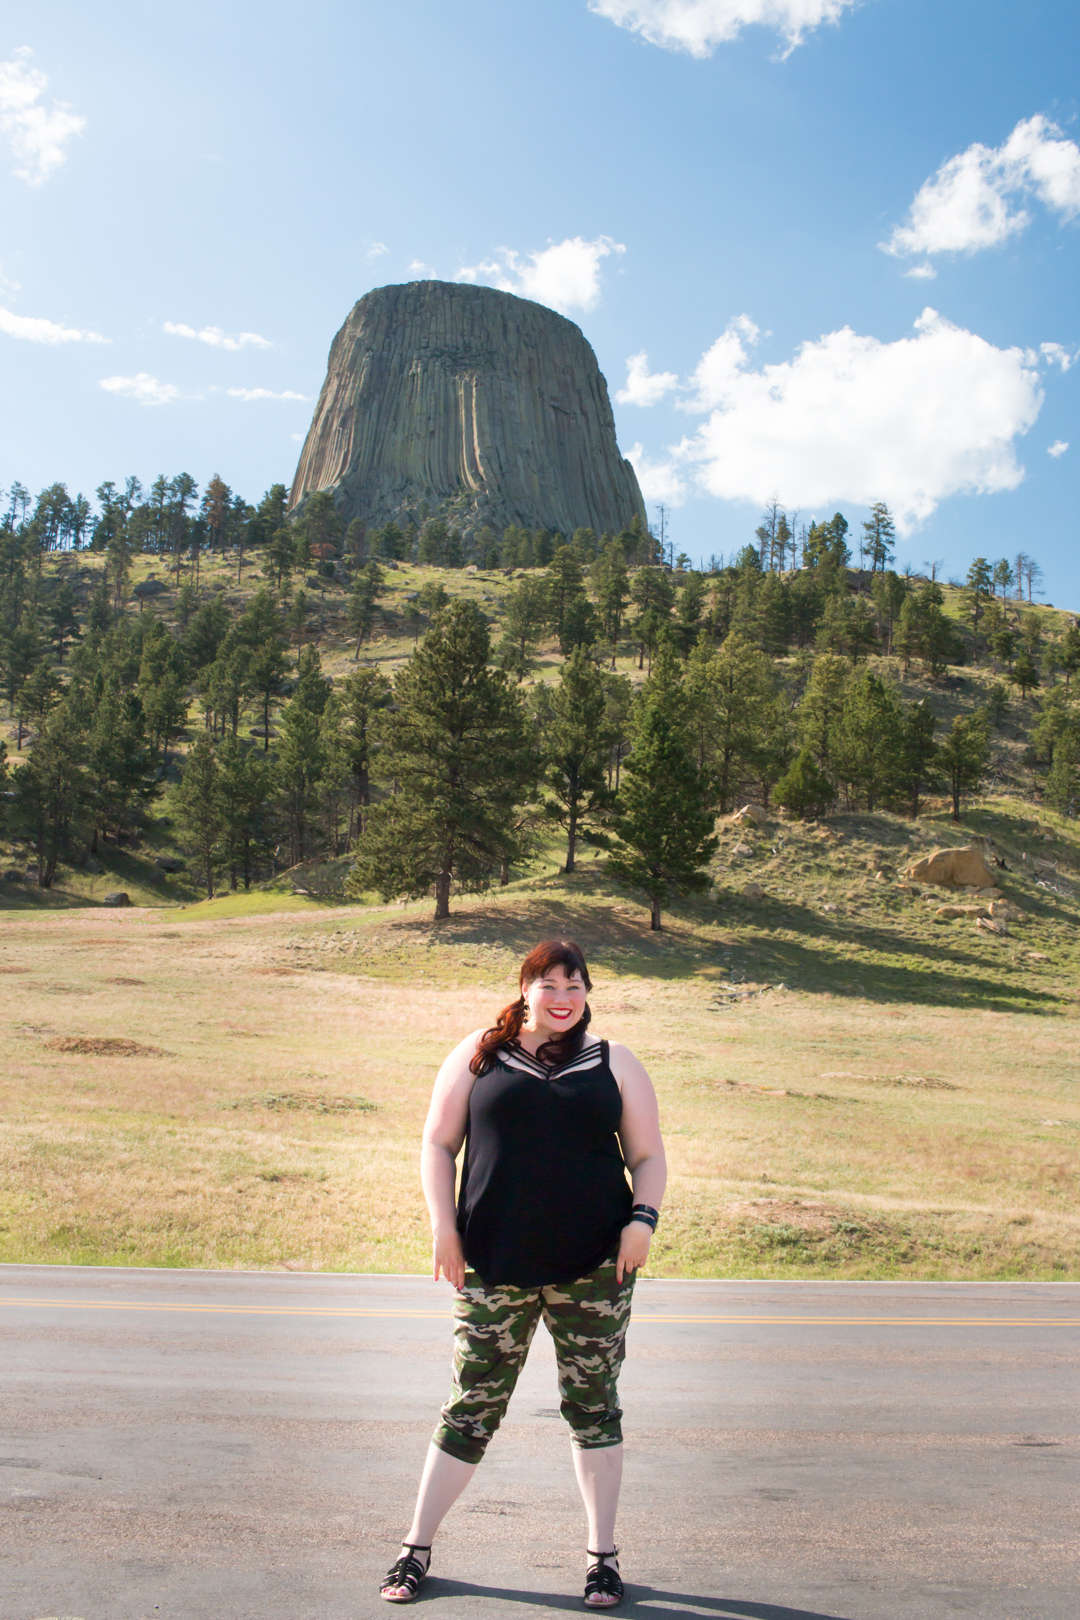 Loralette Review, Style Plus Curves, Chicago Blogger, Chicago Plus Size Blogger, Plus Size Blogger, Amber McCulloch, Loralette, Avenue Plus, Loralette Plus Size Camo Pants, Cage V-Neck Tank, Devil's Tower, Wyoming